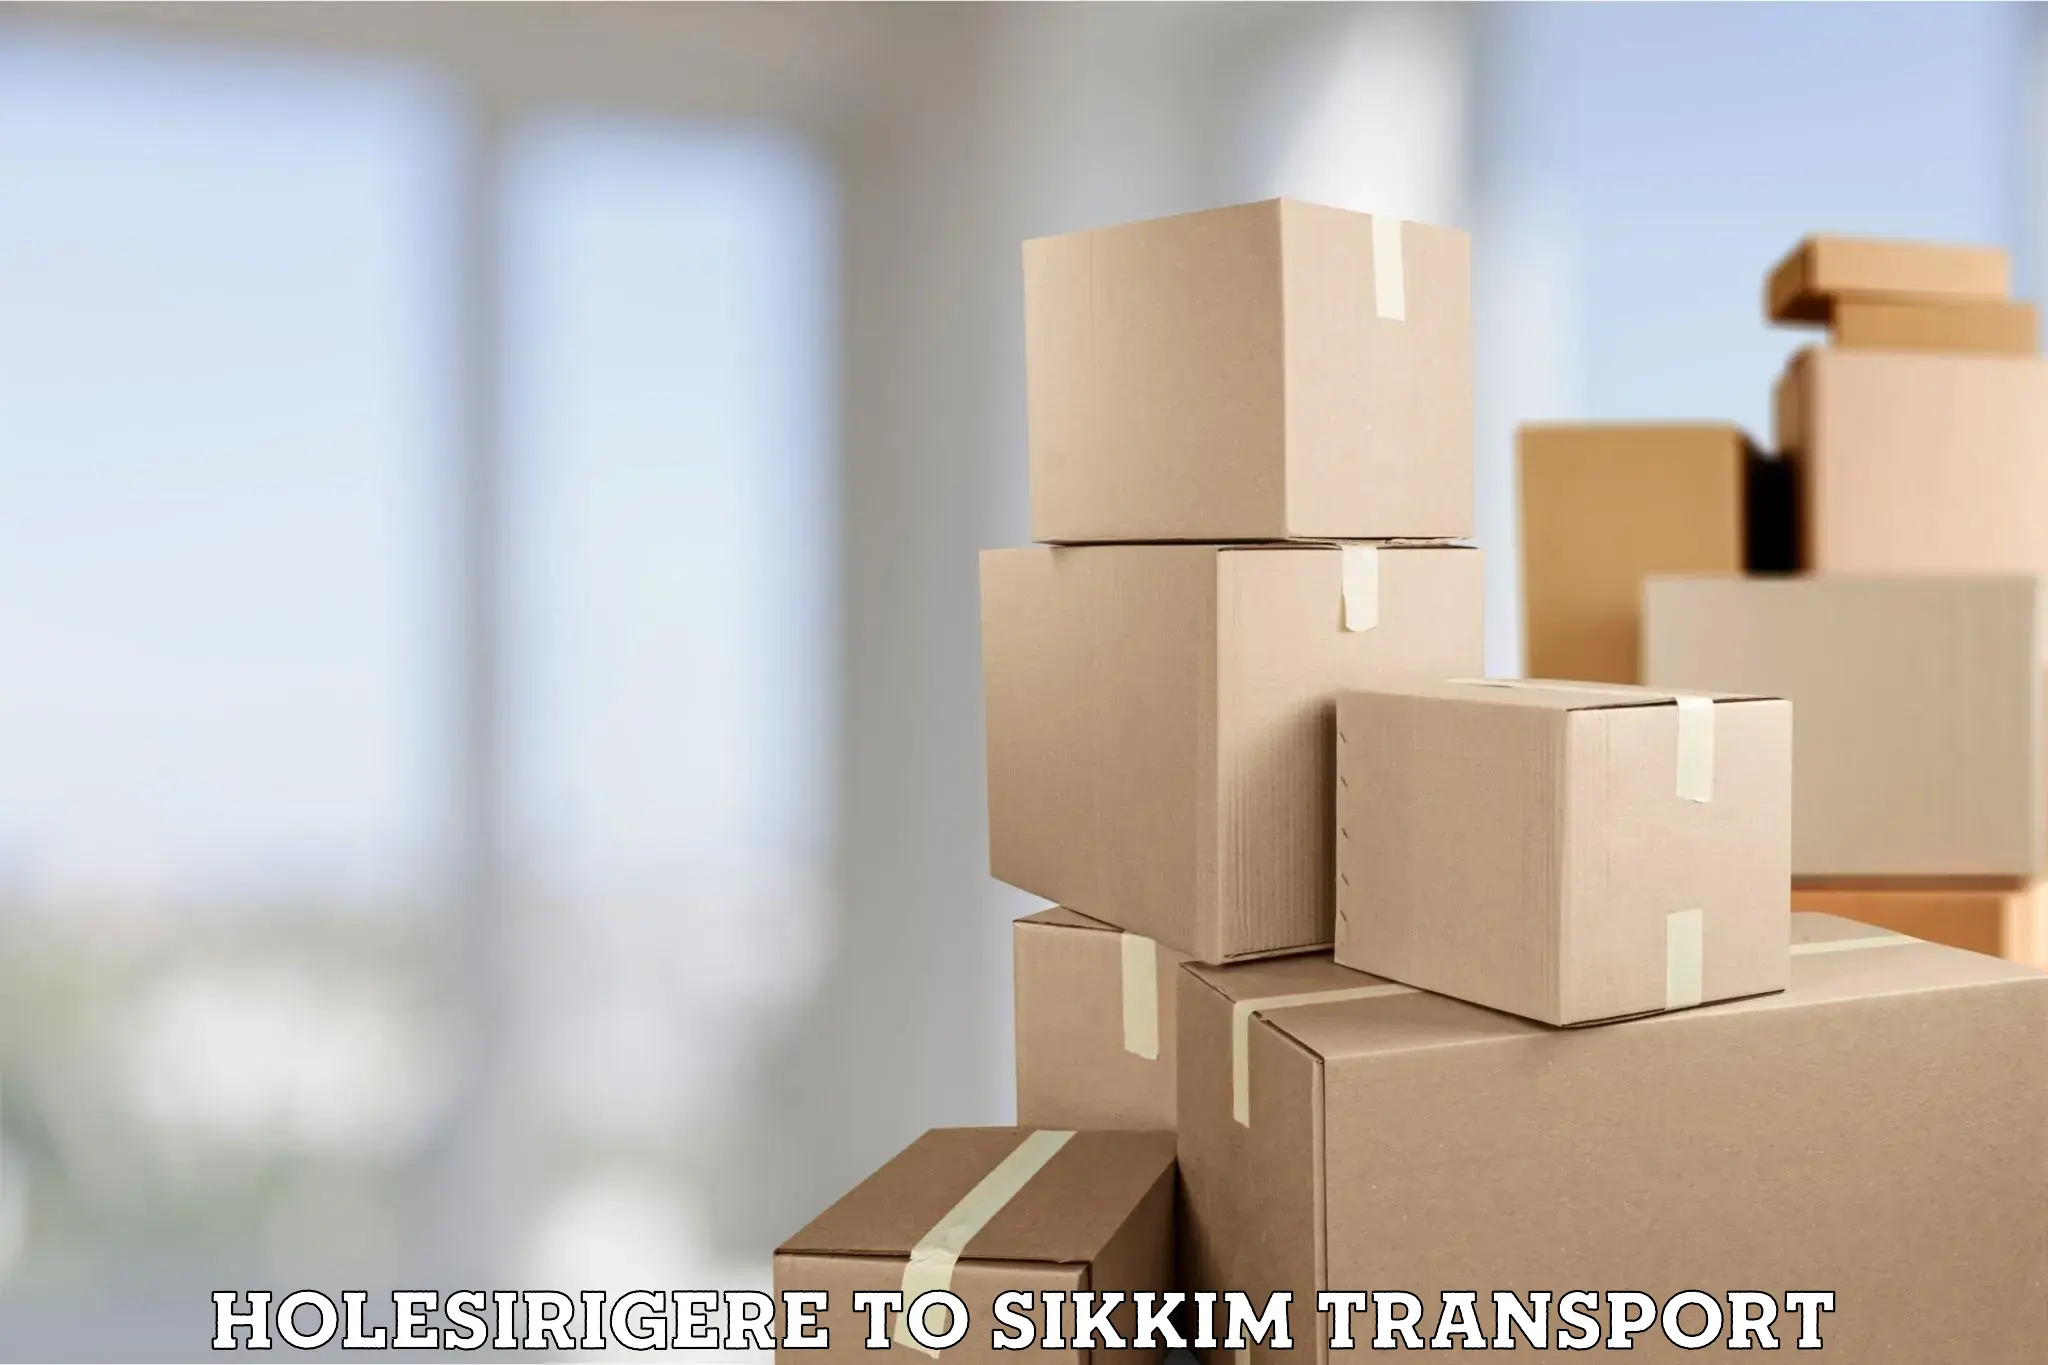 Daily transport service Holesirigere to East Sikkim